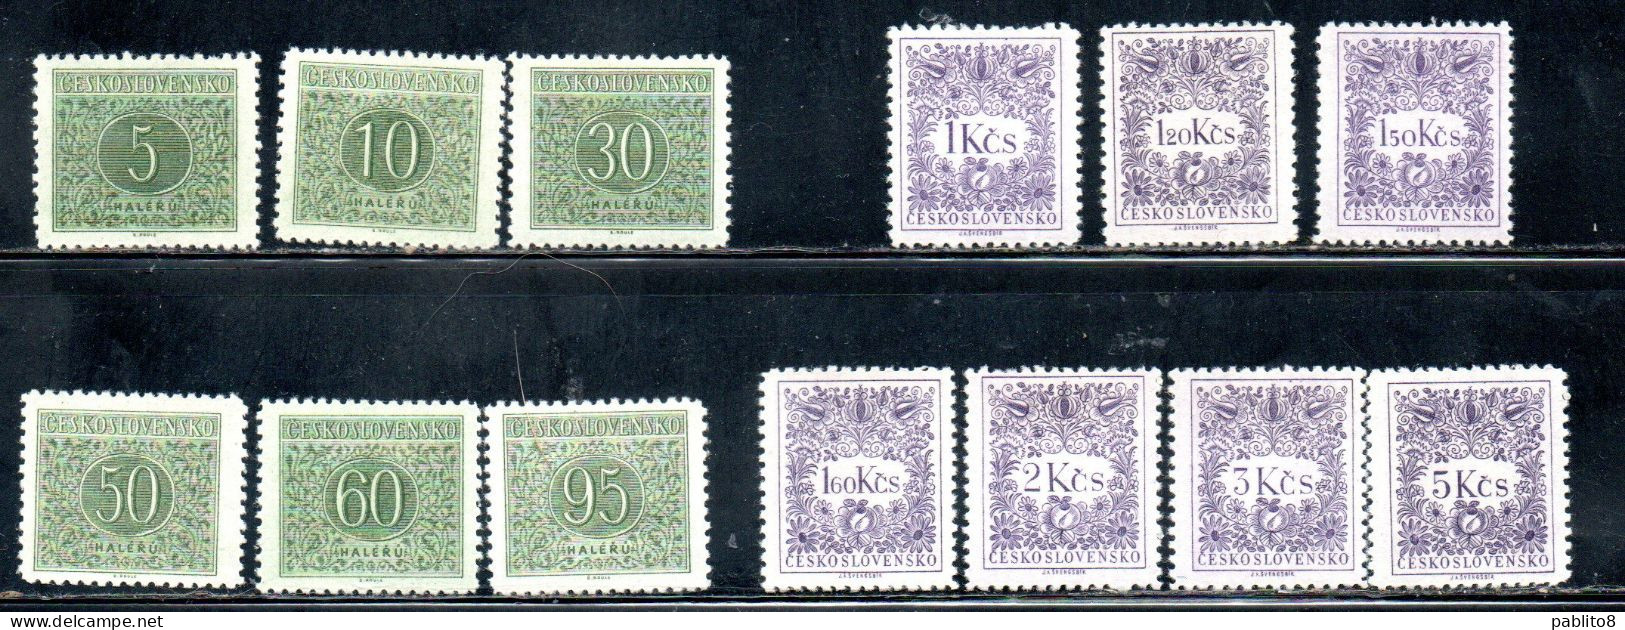 CZECHOSLOVAKIA CECOSLOVACCHIA 1954 1955 POSTAGE DUE STAMPS TAXE SEGNATASSE COMPLETE SET SERIE COMPLETA MNH - Timbres-taxe